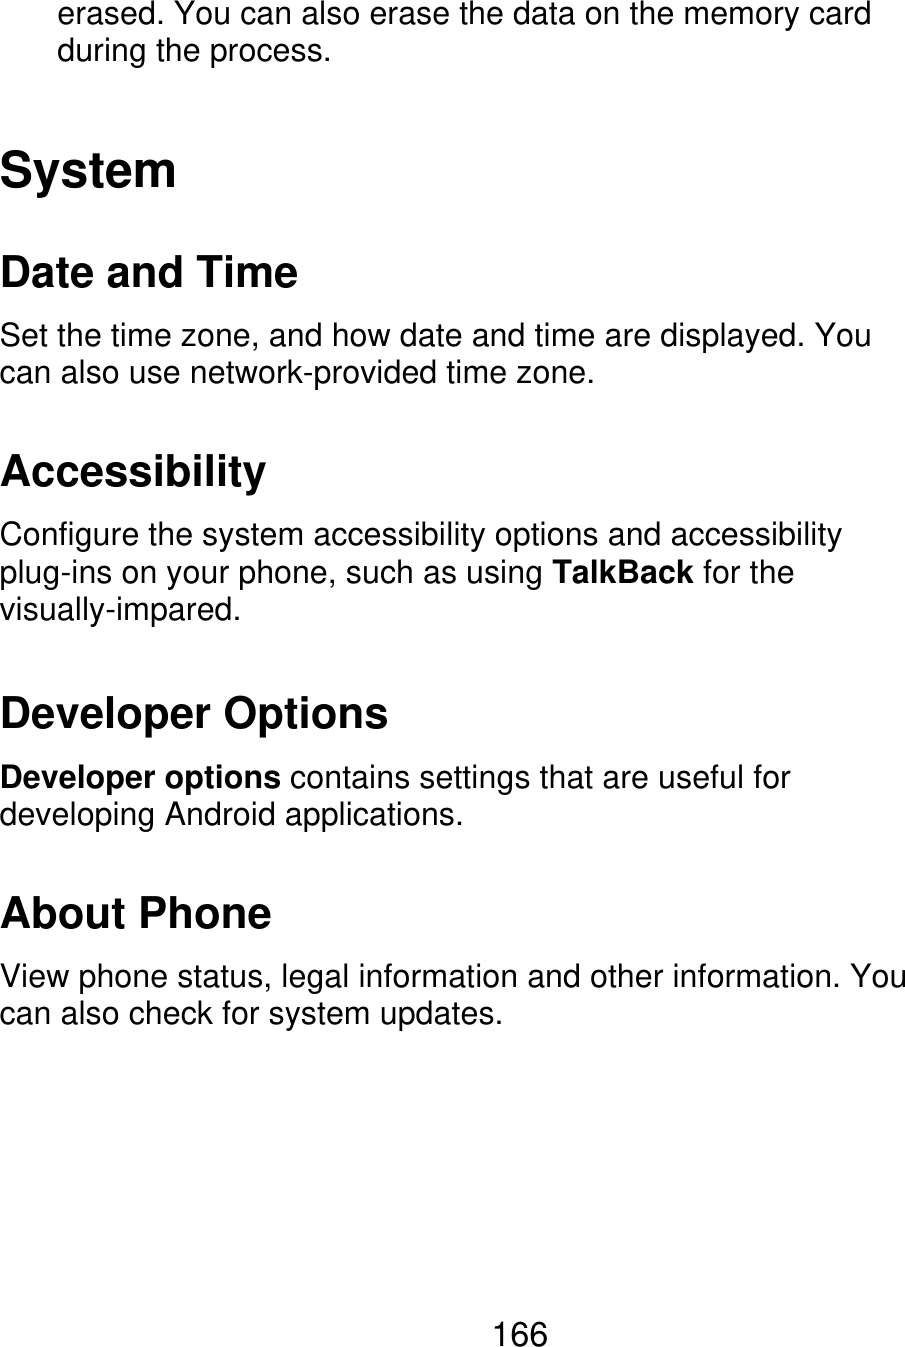 erased. You can also erase the data on the memory card during the process. System Date and Time Set the time zone, and how date and time are displayed. You can also use network-provided time zone. Accessibility Configure the system accessibility options and accessibility plug-ins on your phone, such as using TalkBack for the visually-impared. Developer Options Developer options contains settings that are useful for developing Android applications. About Phone View phone status, legal information and other information. You can also check for system updates. 166 